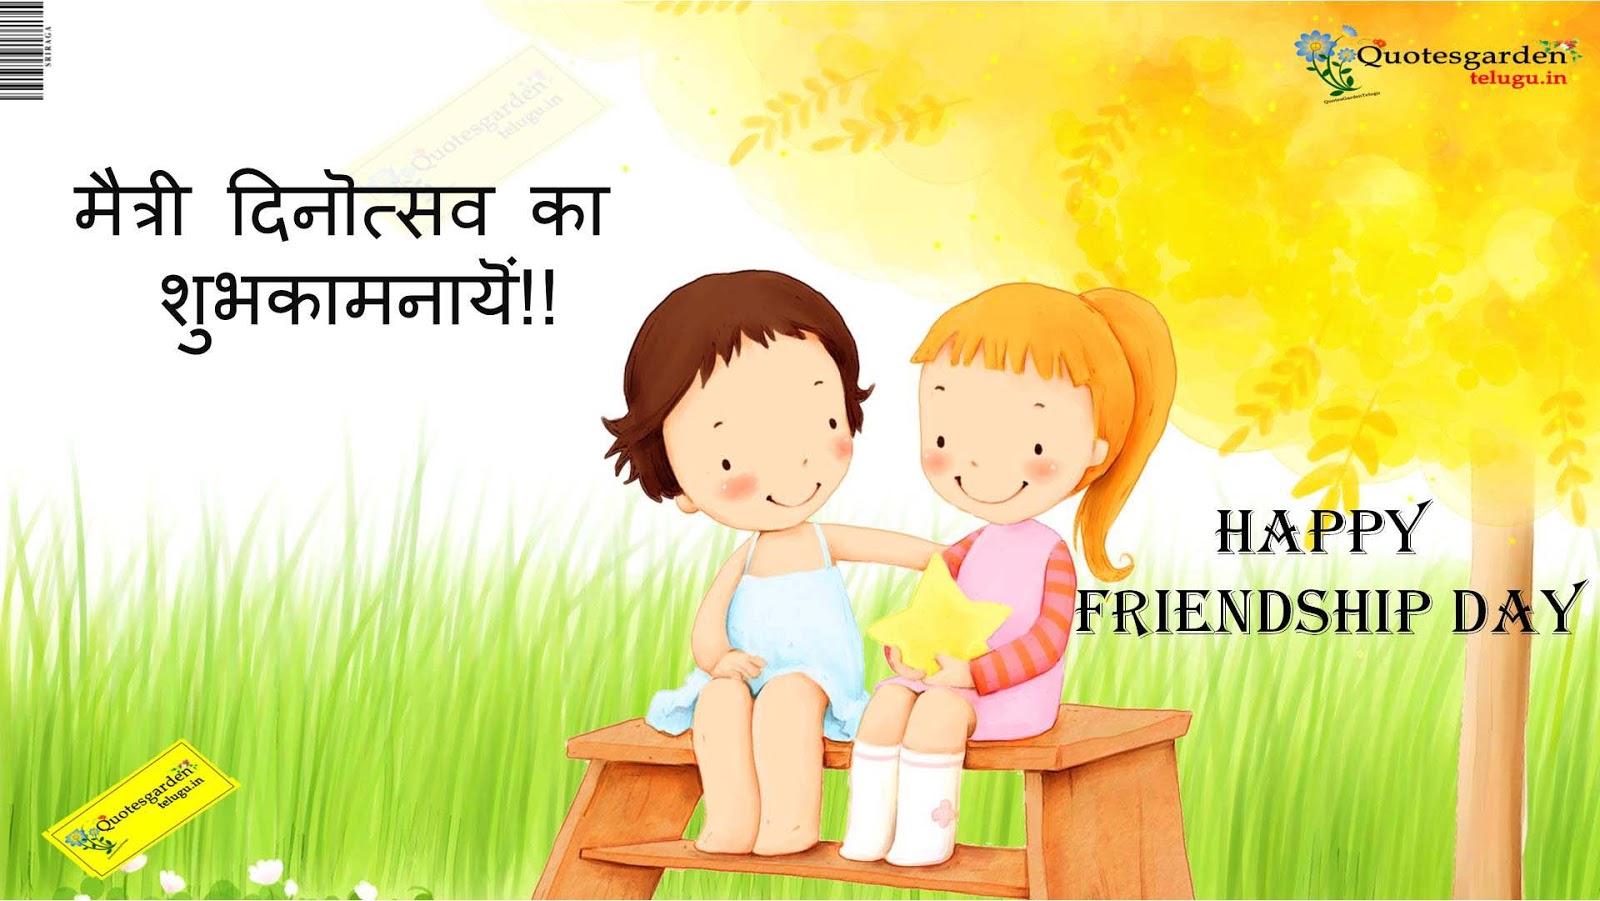 Friendship day hindi quotes wallpapers images wishes greetings ...